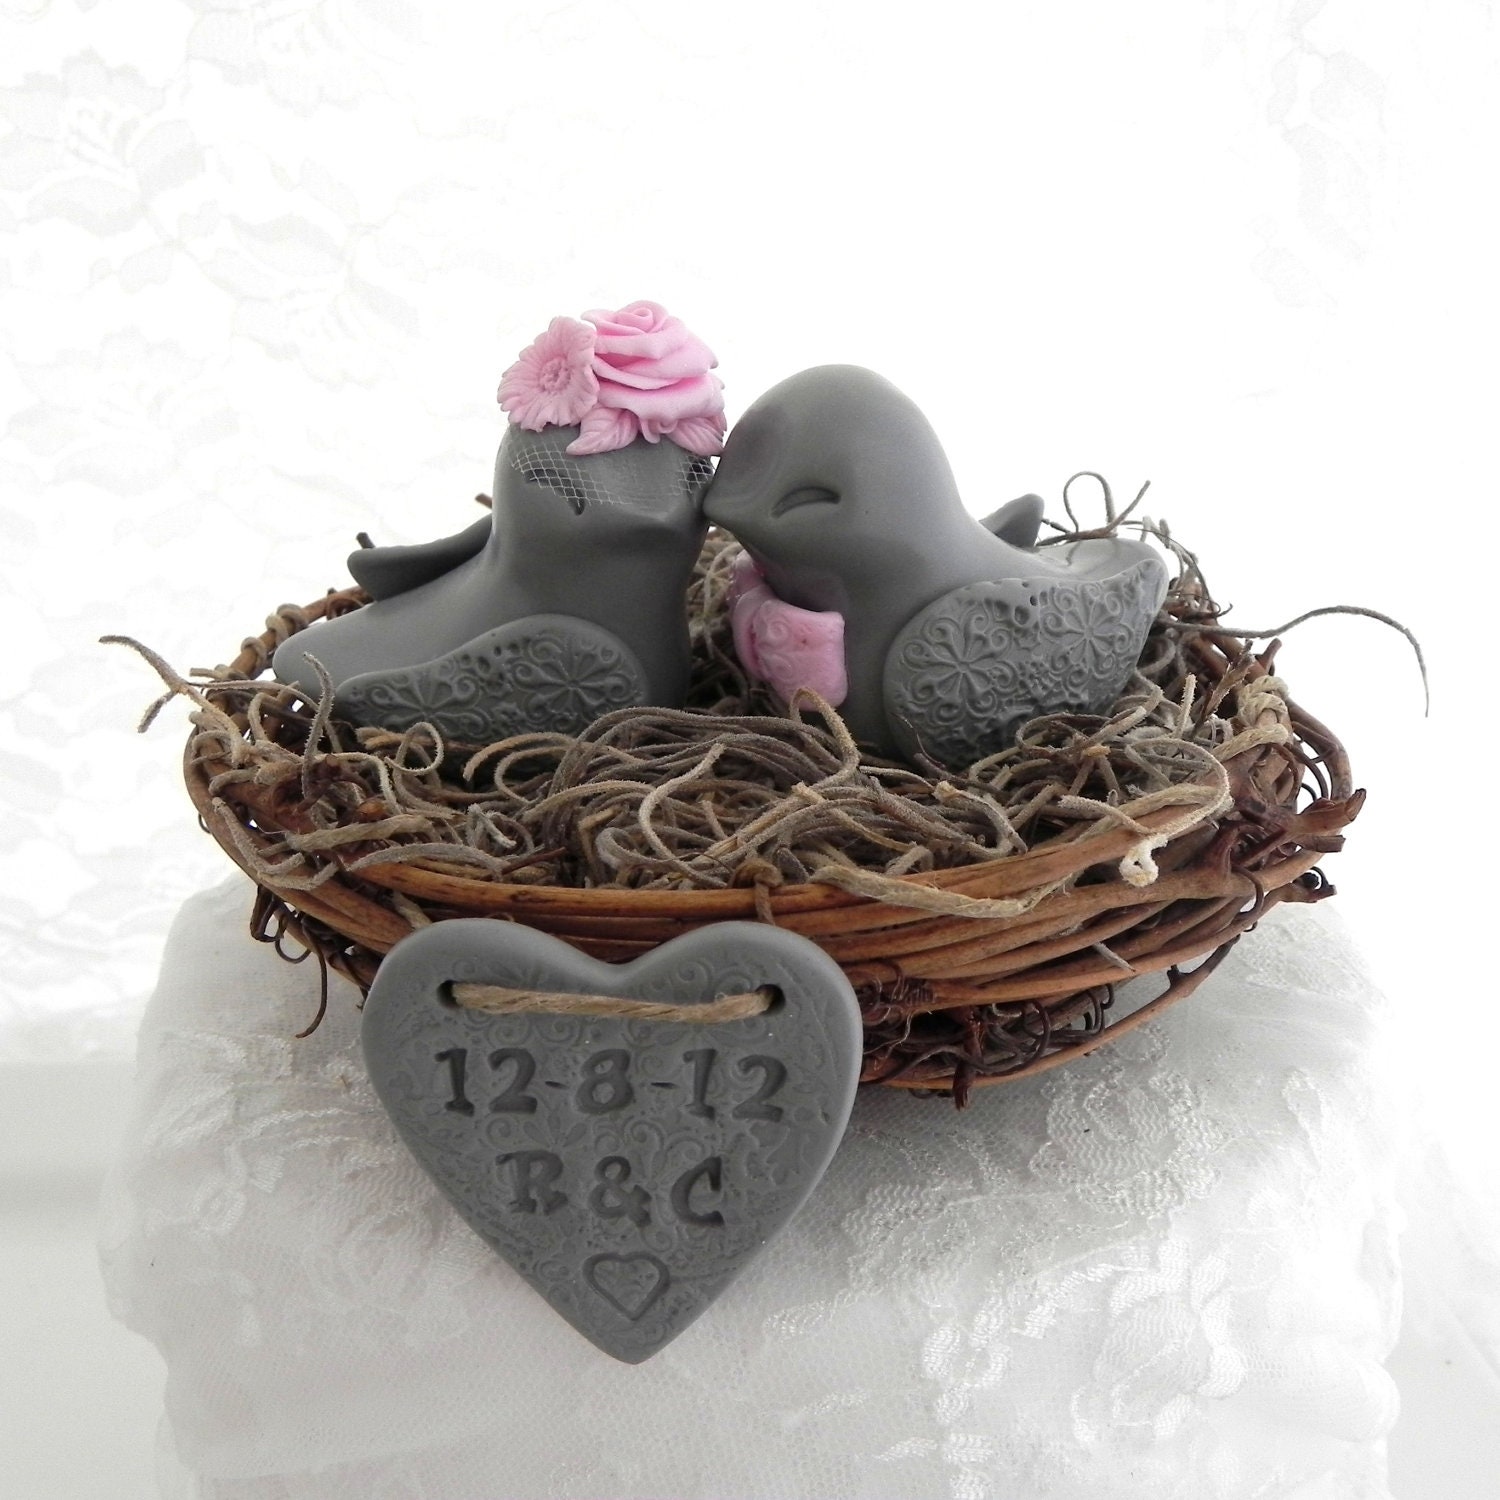 Rustic Wedding Cake Topper - Pale Pink and Grey, Love Birds in Nest - Personalized Heart - Bride and Groom - Simple and Elegant - LavaGifts